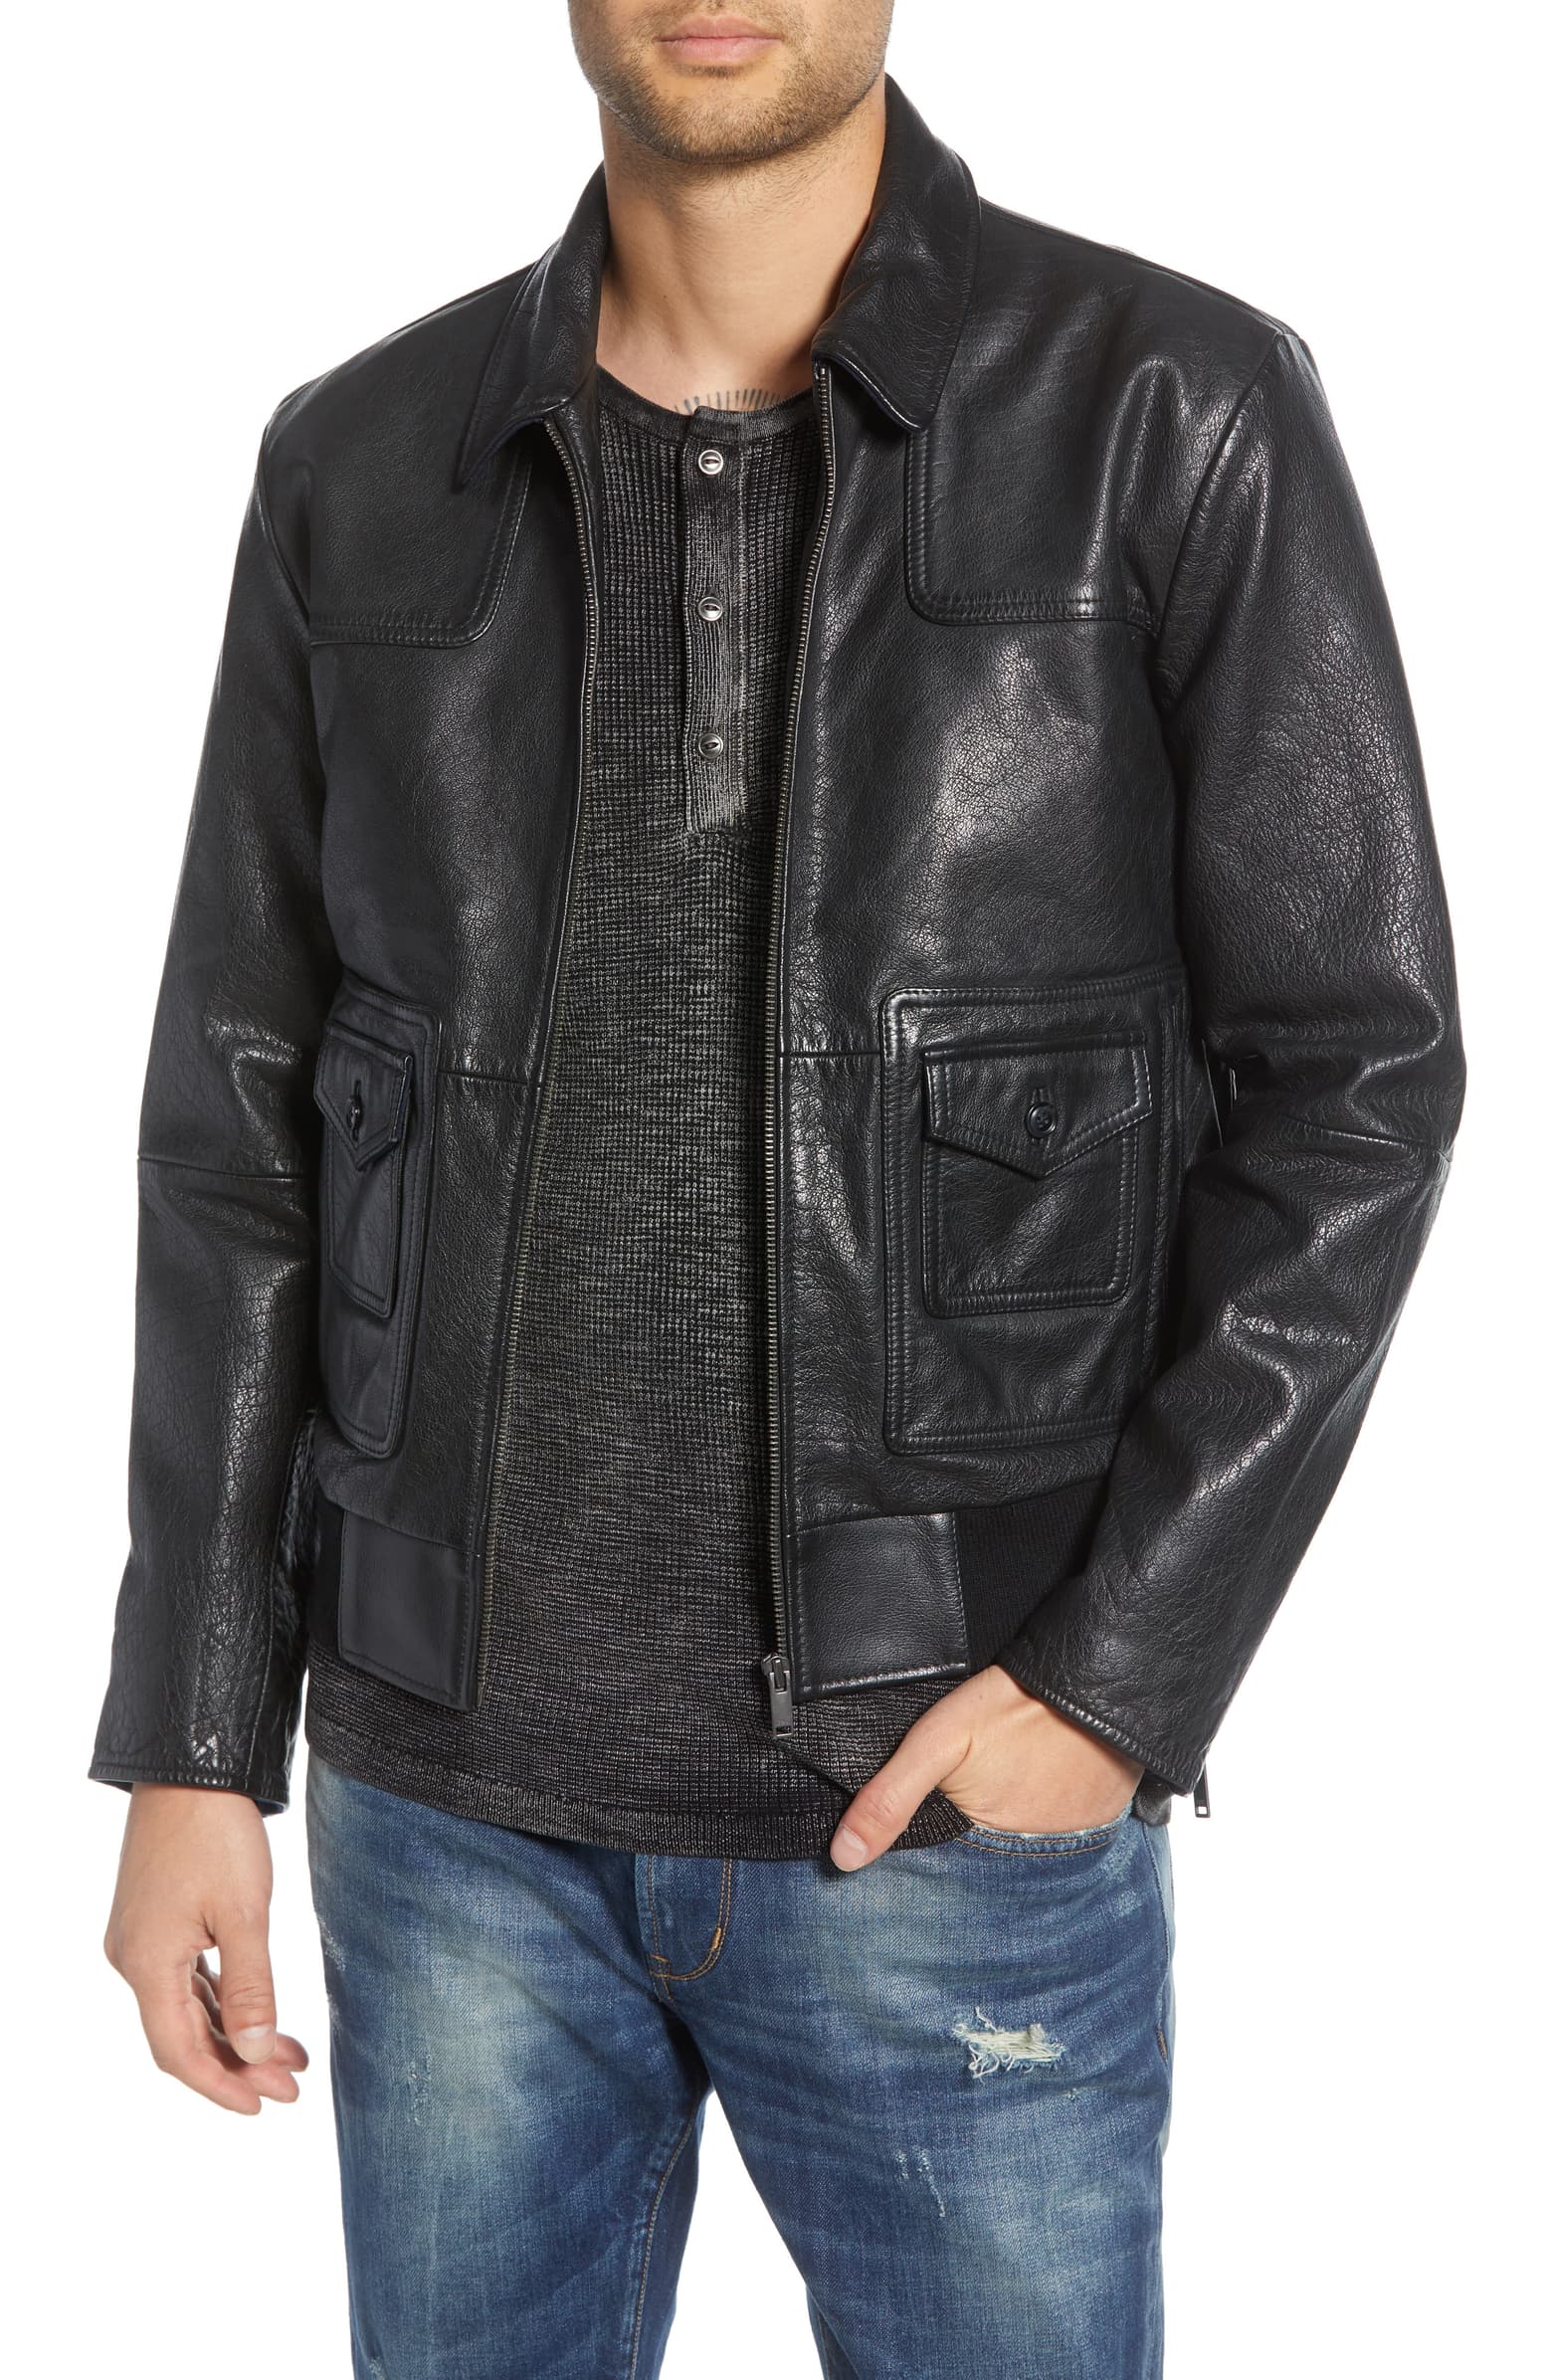 20 Great Leather Jackets to Wear This Fall - Maxim